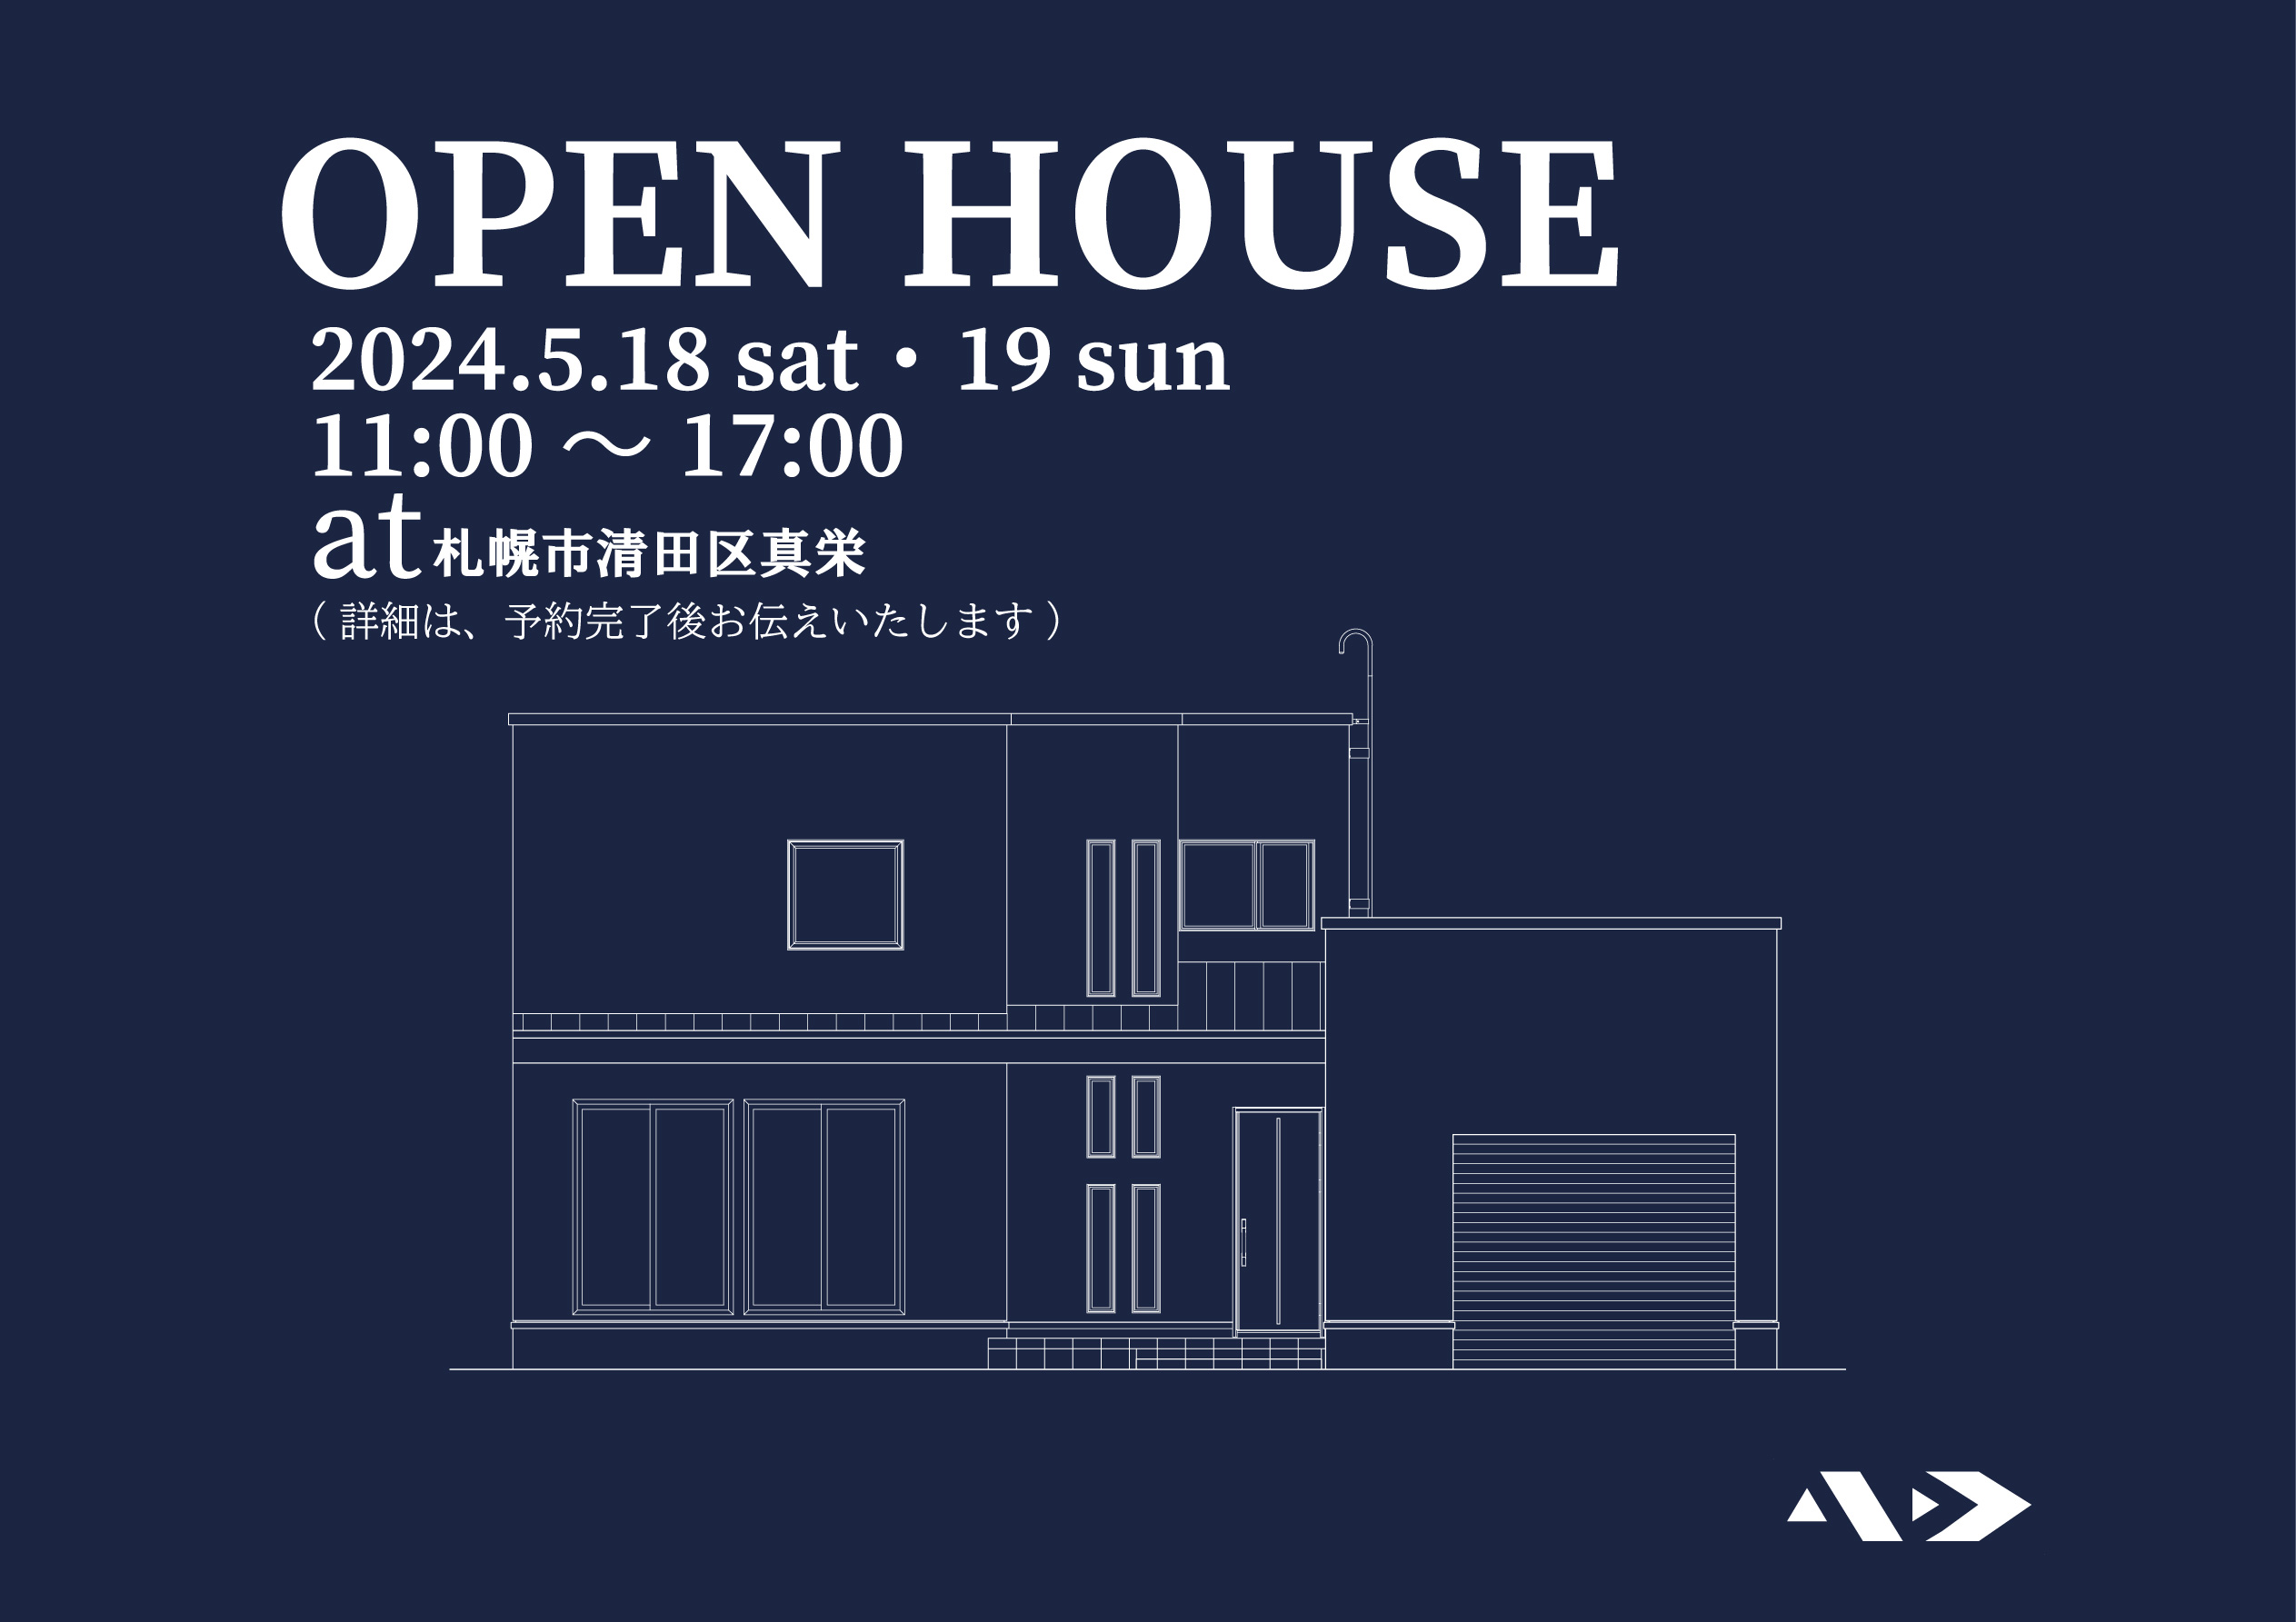 OPEN HOUSE at 清田区真栄